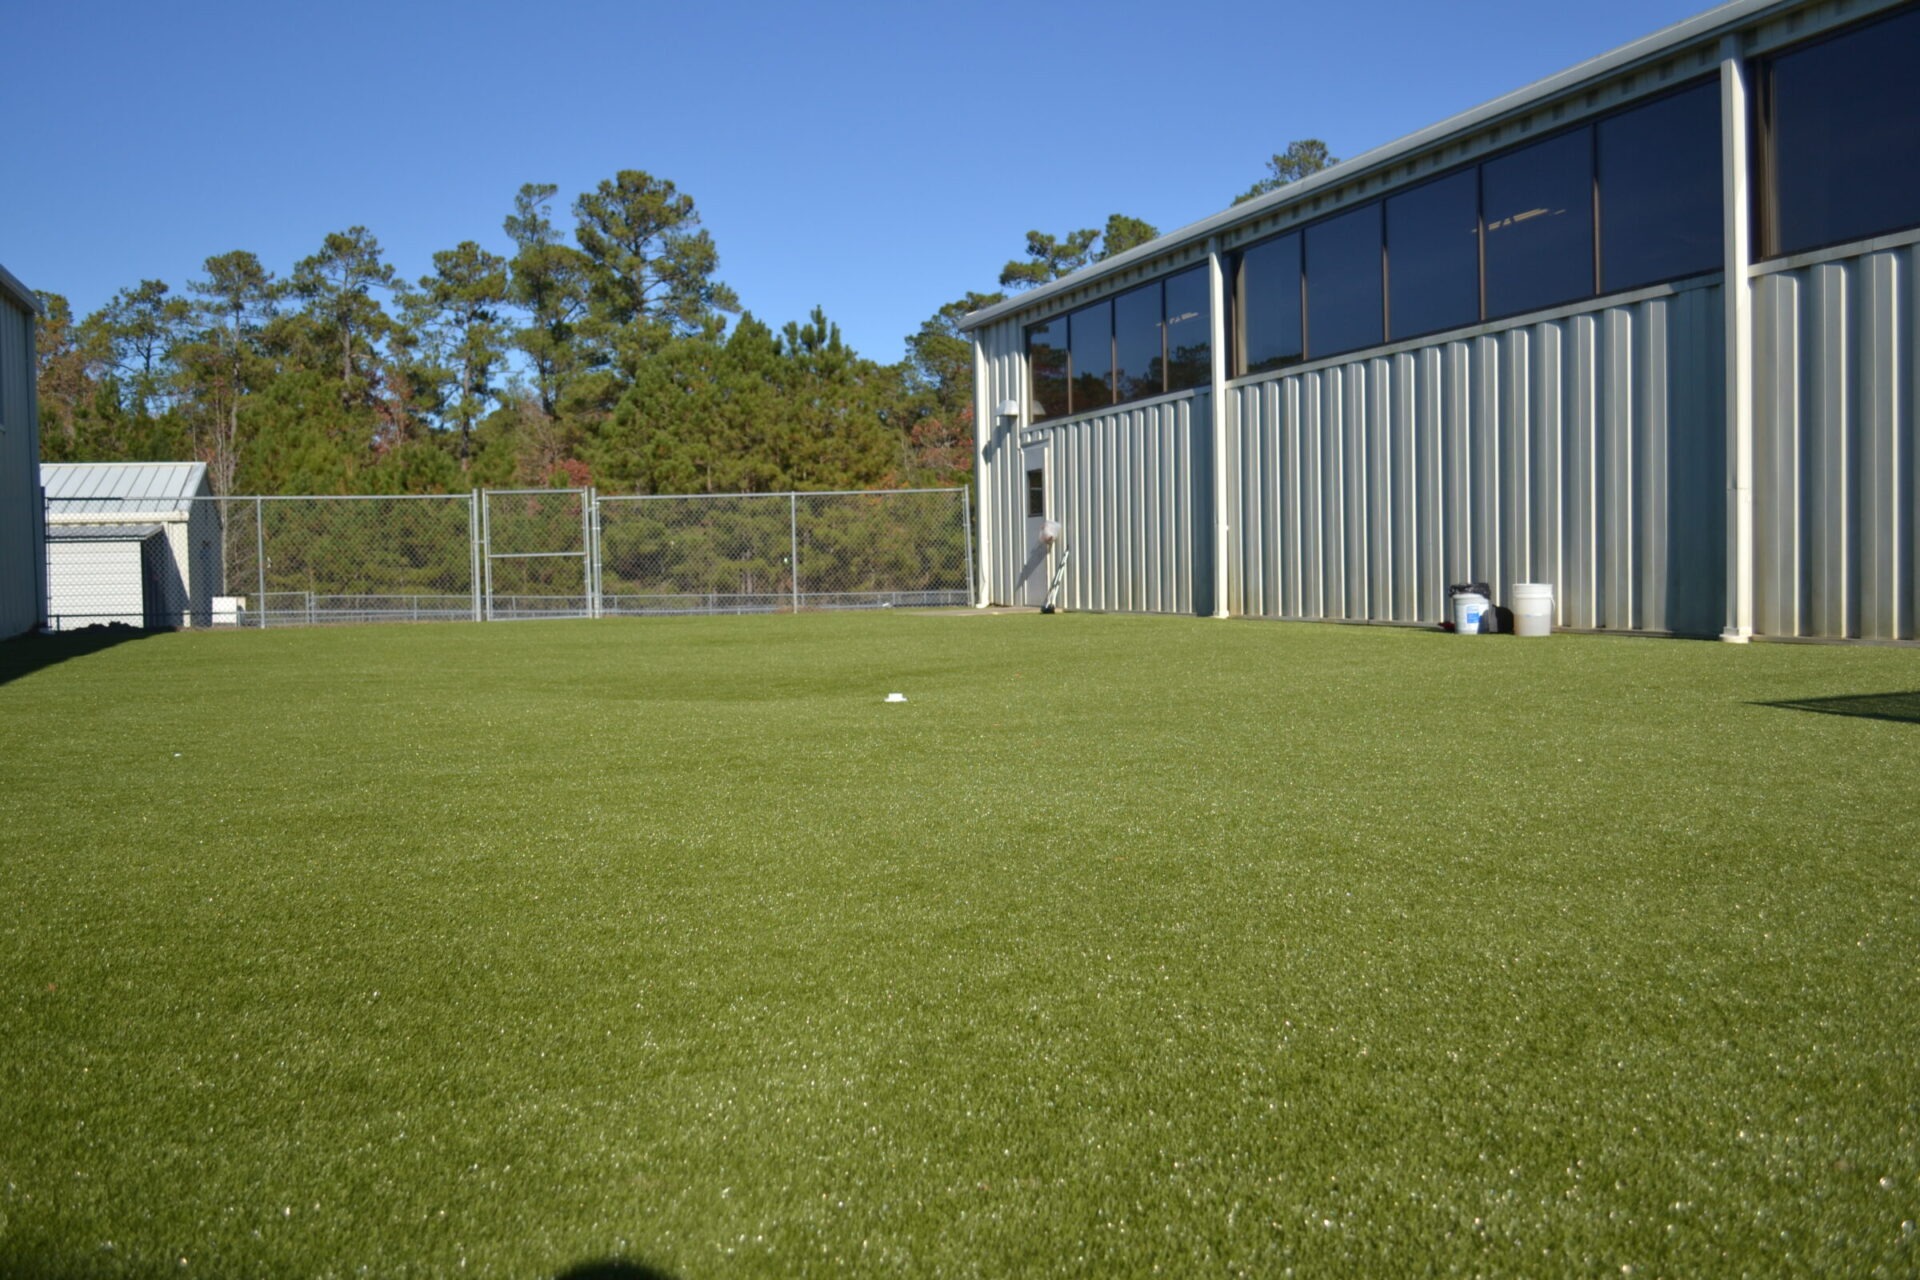 An expansive artificial turf field beside a metal-clad building with large windows, edged by a chain-link fence, under a clear blue sky.